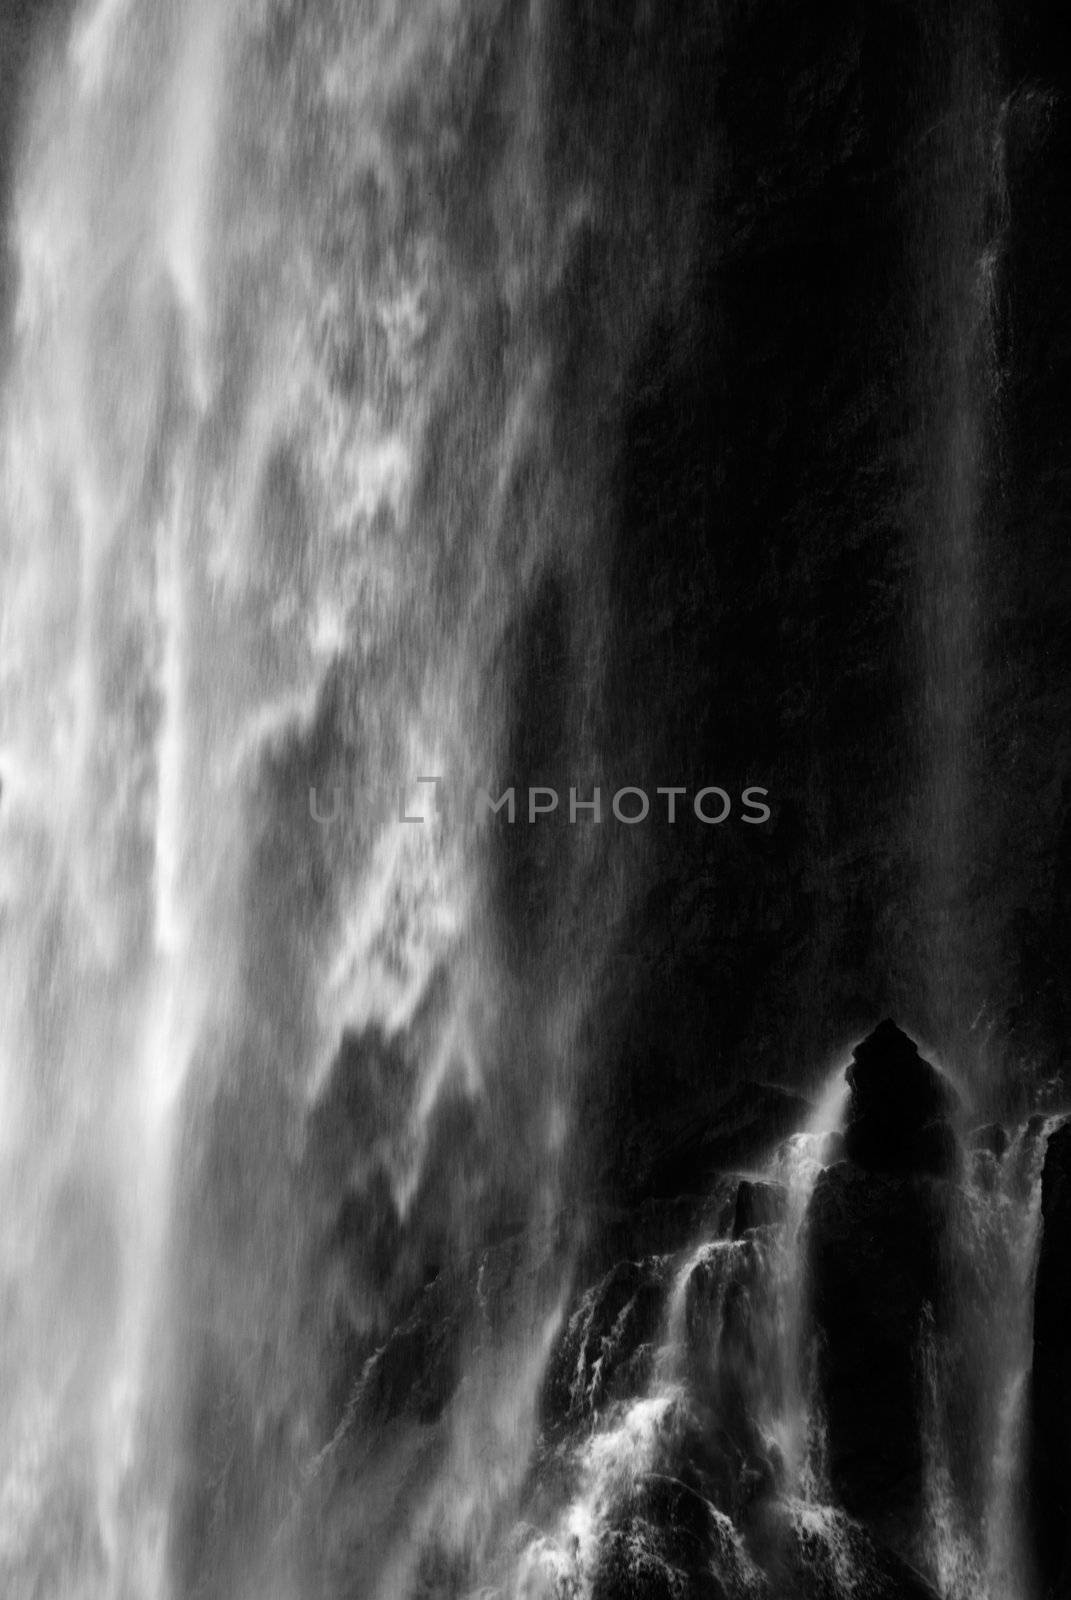 It is dramatic blurred view of waterfall flowing over rocks.